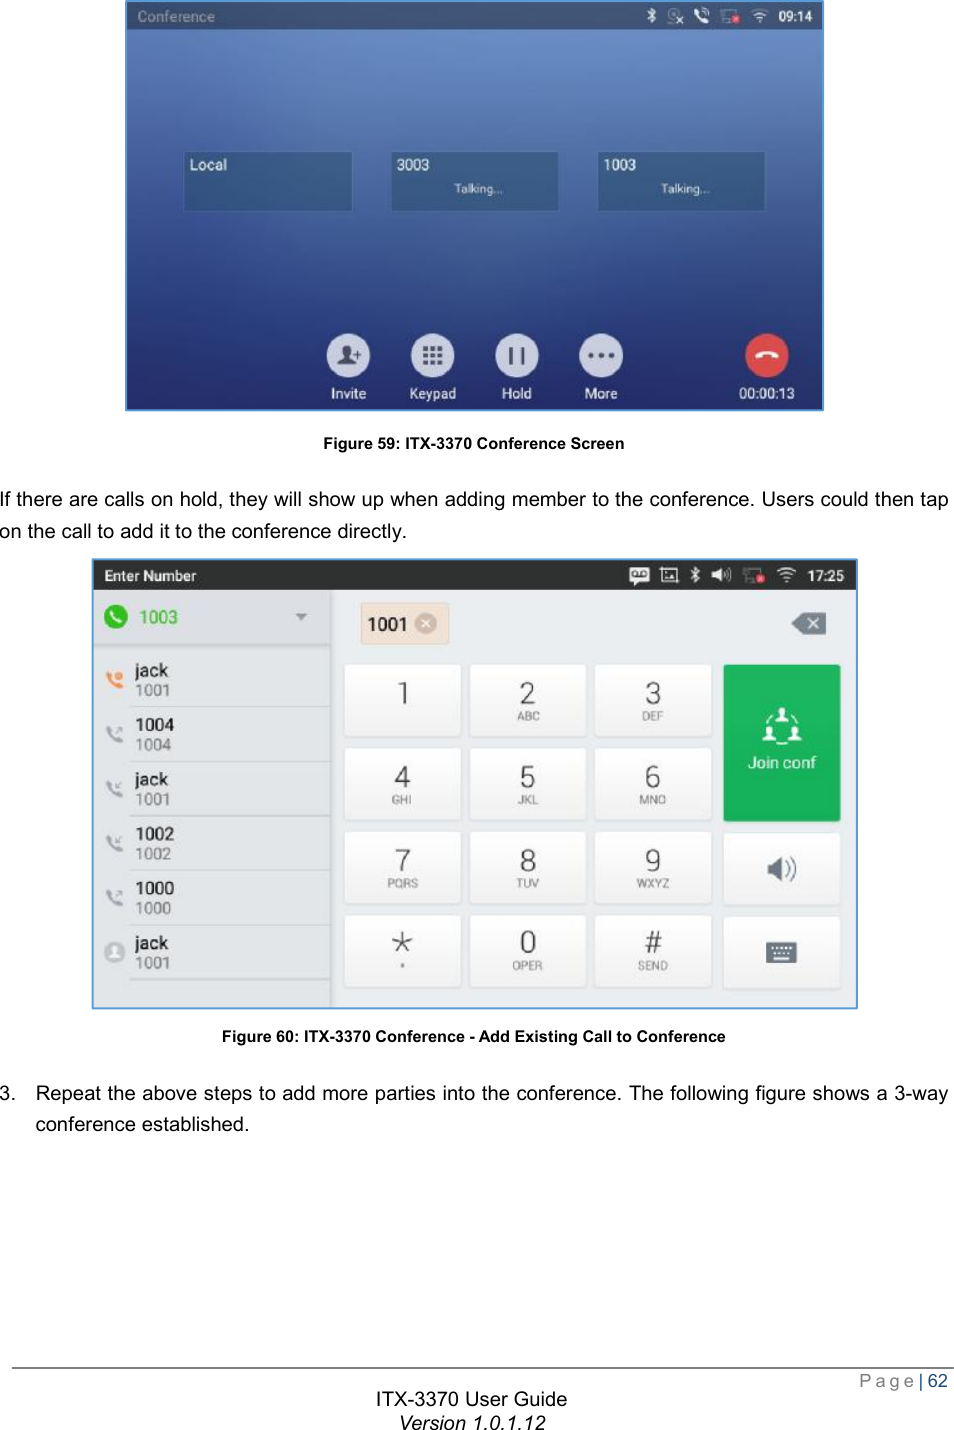  Page| 62  ITX-3370 User Guide Version 1.0.1.12   Figure 59: ITX-3370 Conference Screen If there are calls on hold, they will show up when adding member to the conference. Users could then tap on the call to add it to the conference directly.  Figure 60: ITX-3370 Conference - Add Existing Call to Conference 3. Repeat the above steps to add more parties into the conference. The following figure shows a 3-way conference established. 